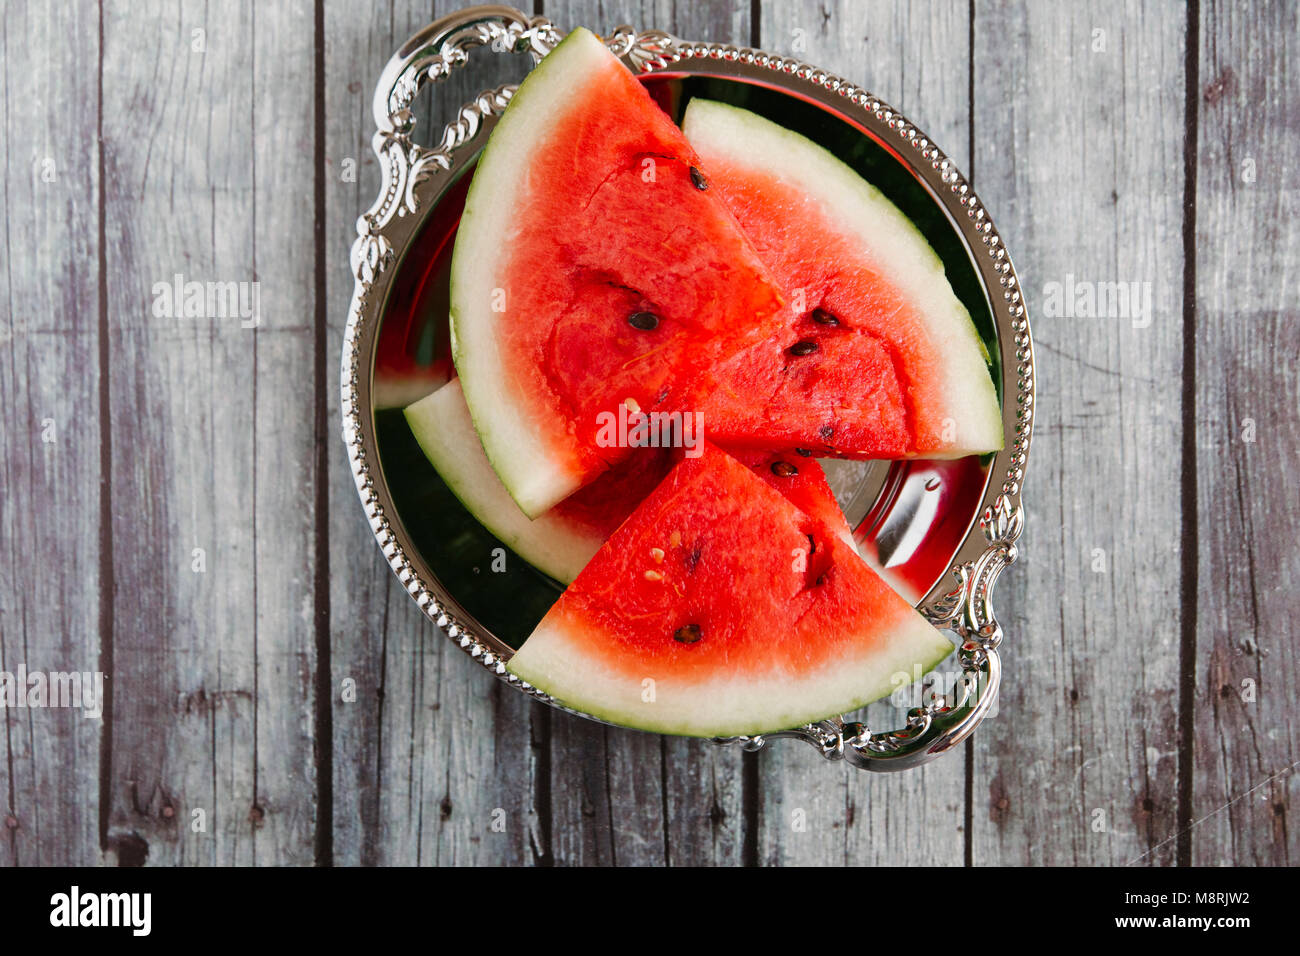 Overhead view of watermelon slices in bowl on wooden table Stock Photo